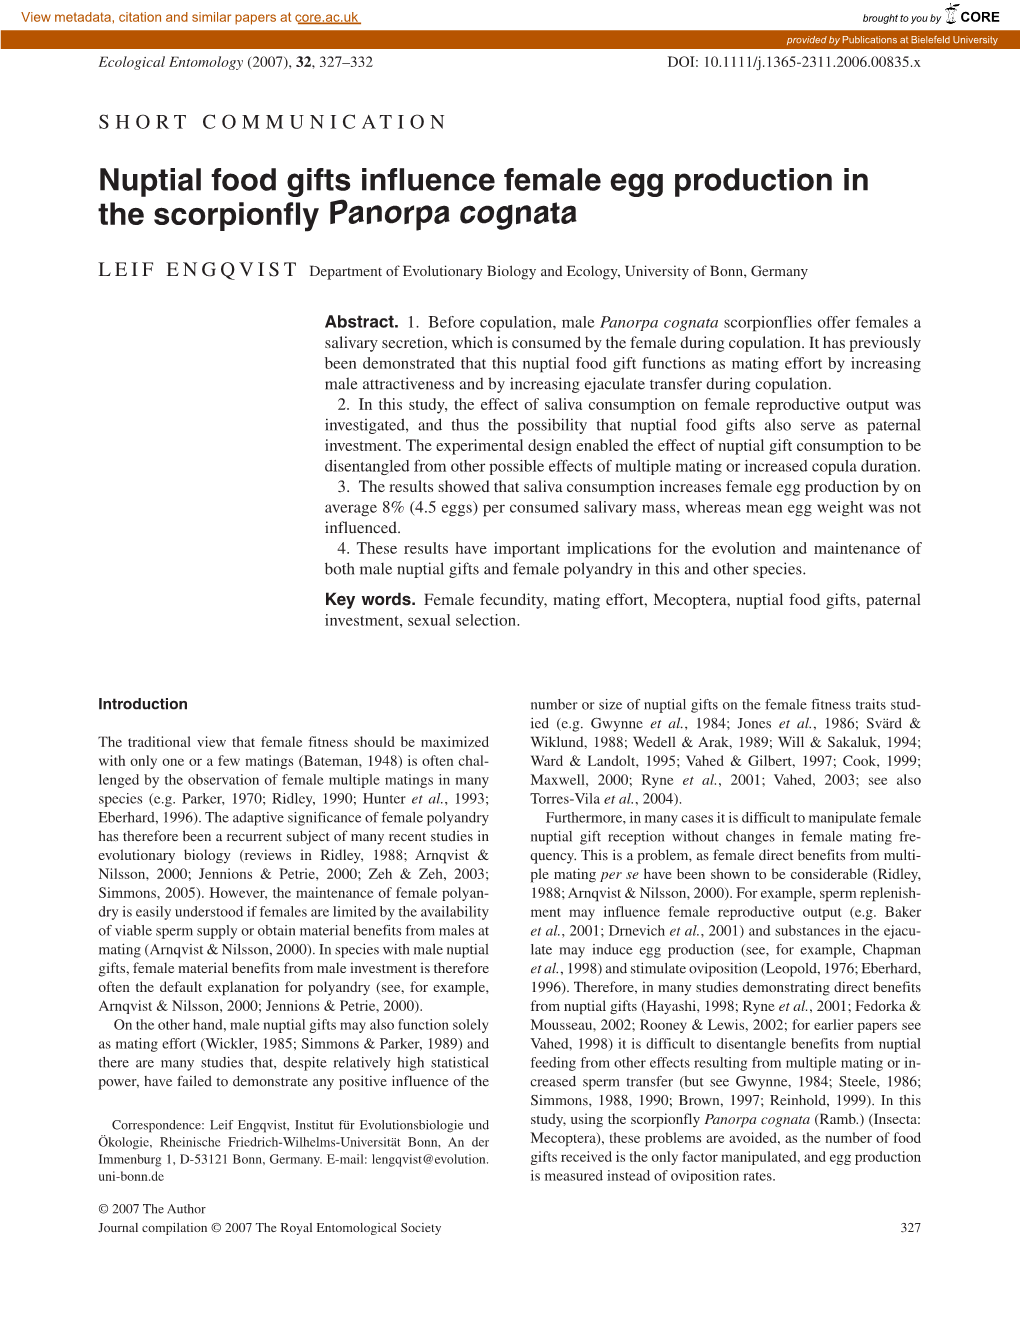 Nuptial Food Gifts Influence Female Egg Production in the Scorpionfly